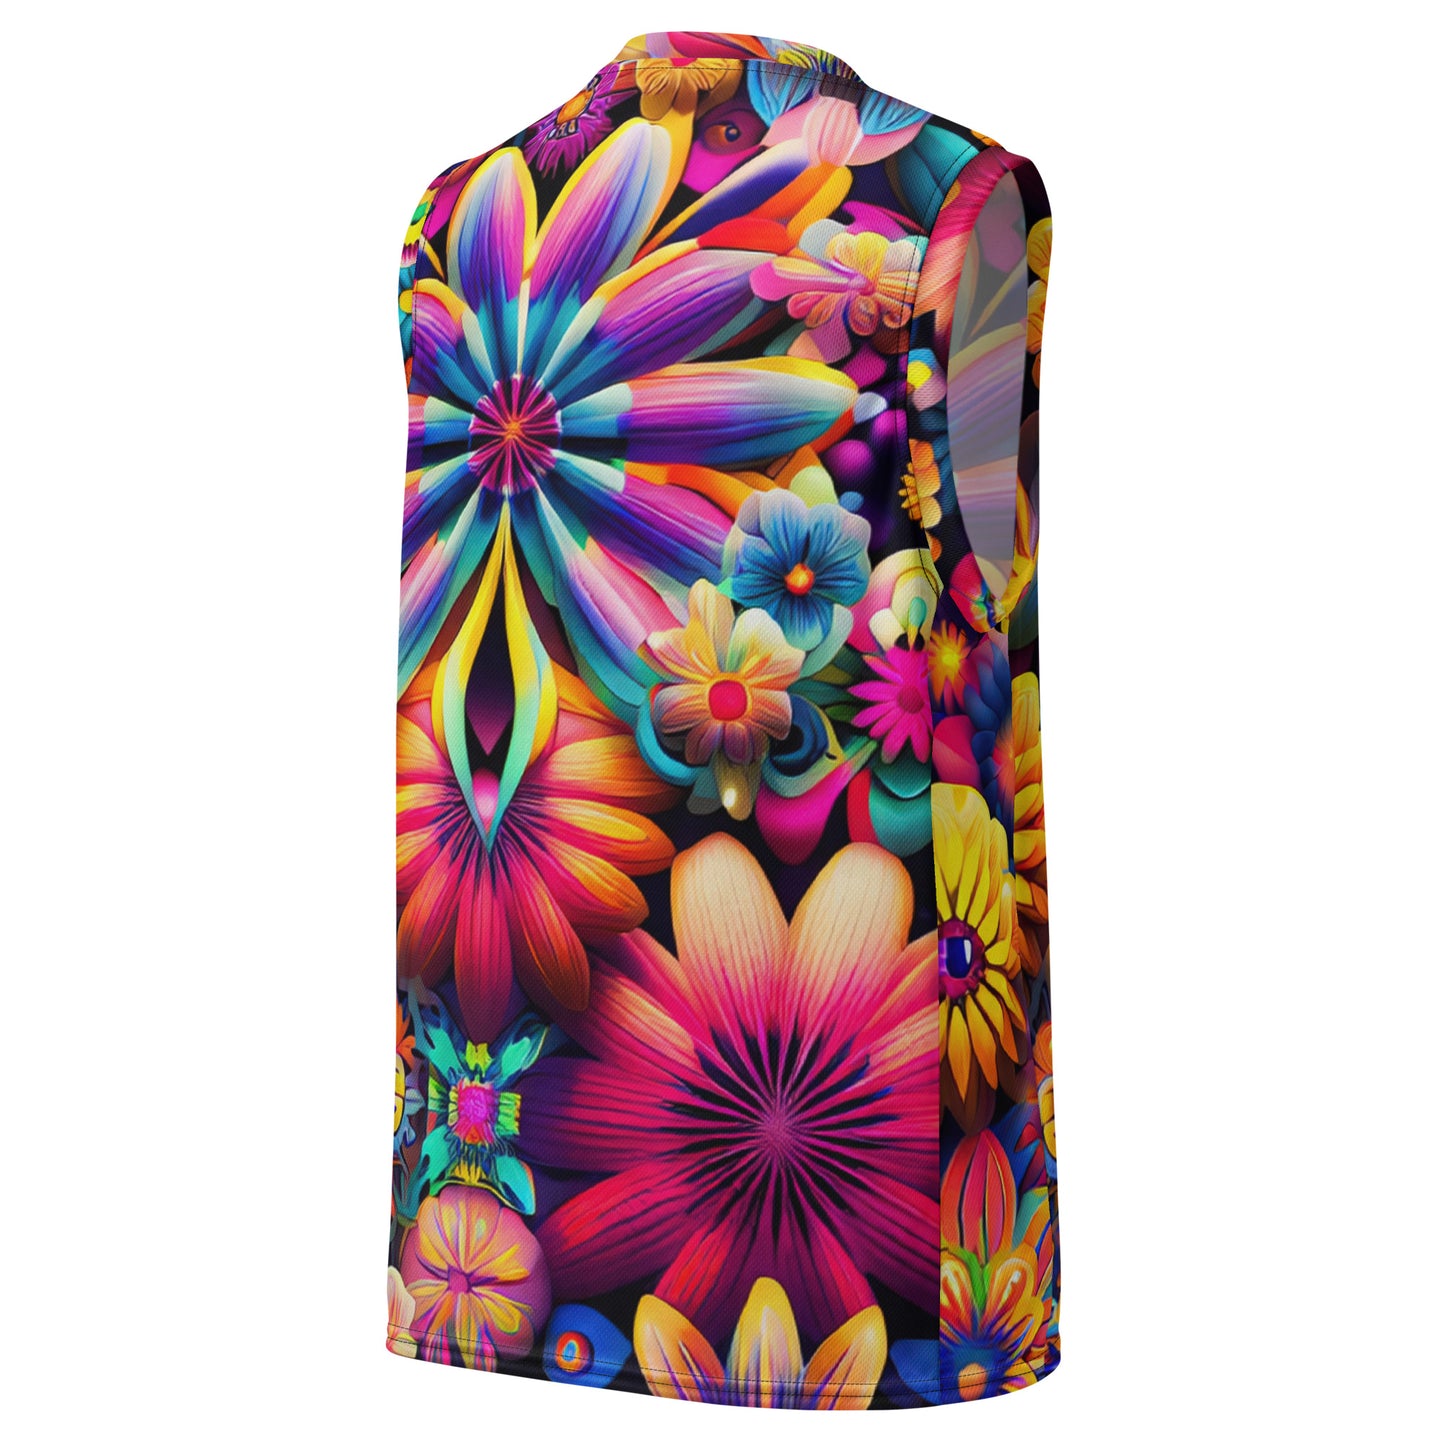 DMV 1508 Floral Recycled unisex basketball jersey